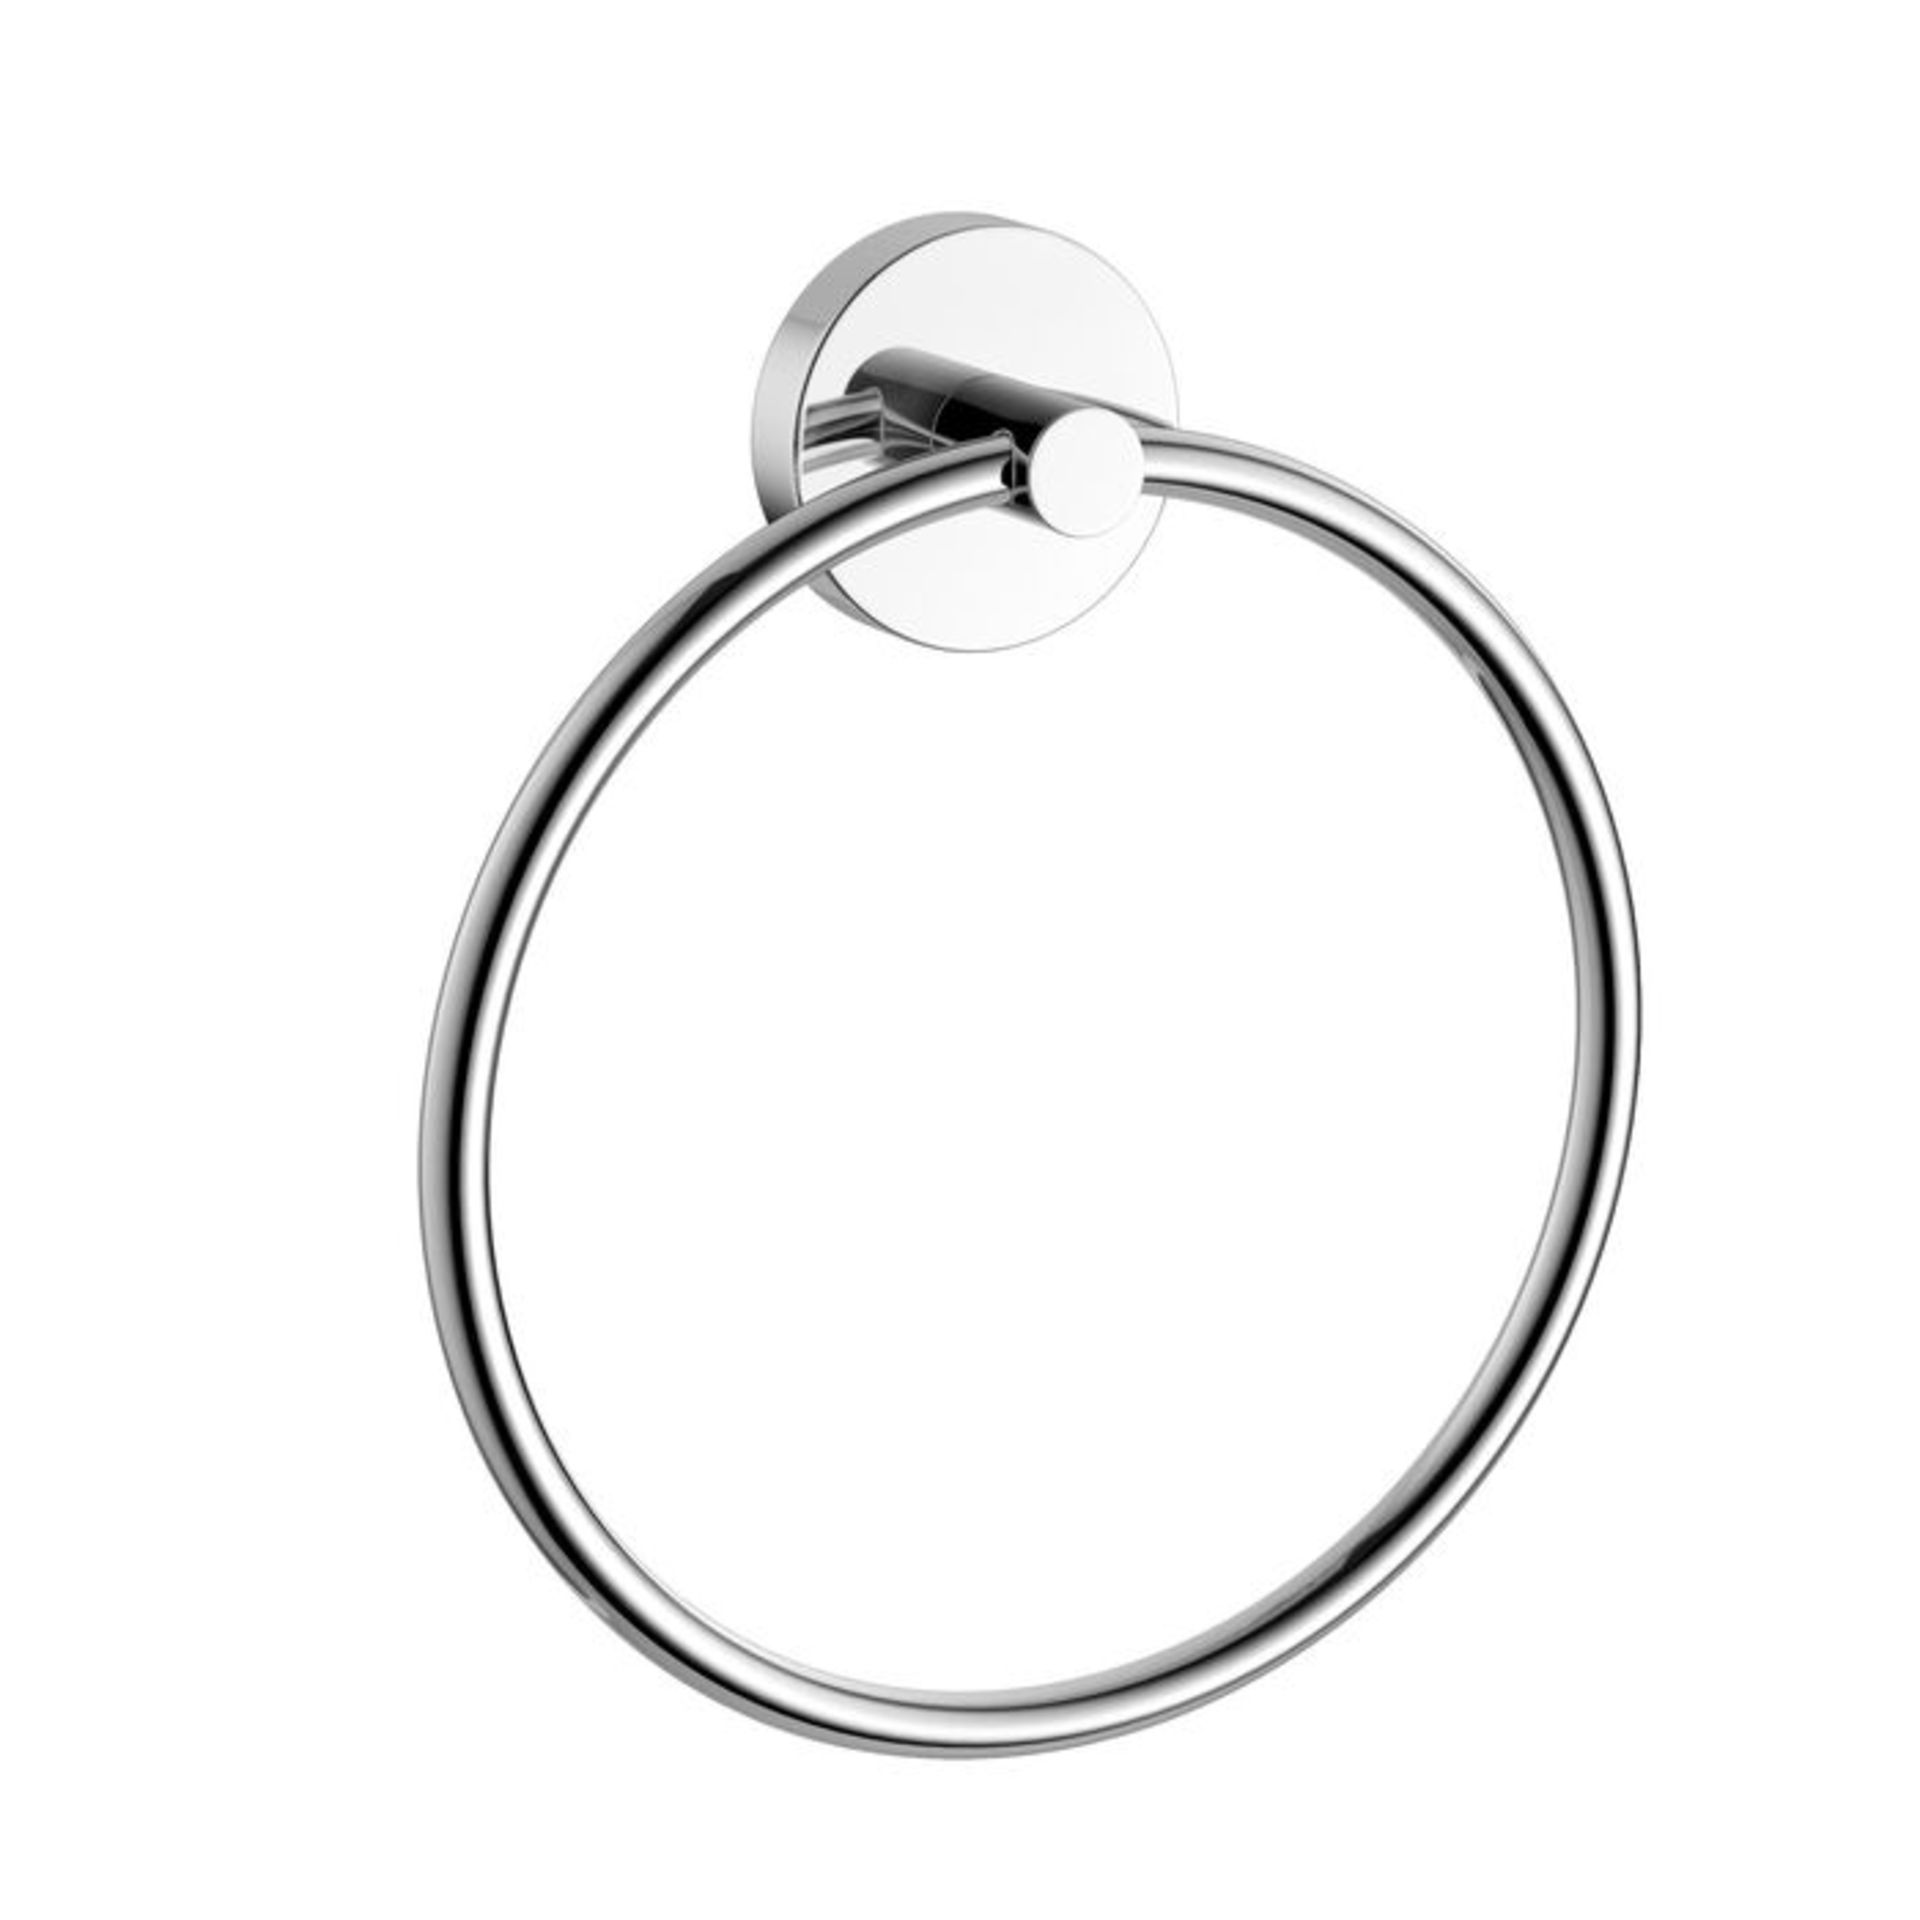 (M1091) Finsbury Towel Ring. Simple yet stylish Completes your bathroom with a little extra fu... - Image 2 of 3